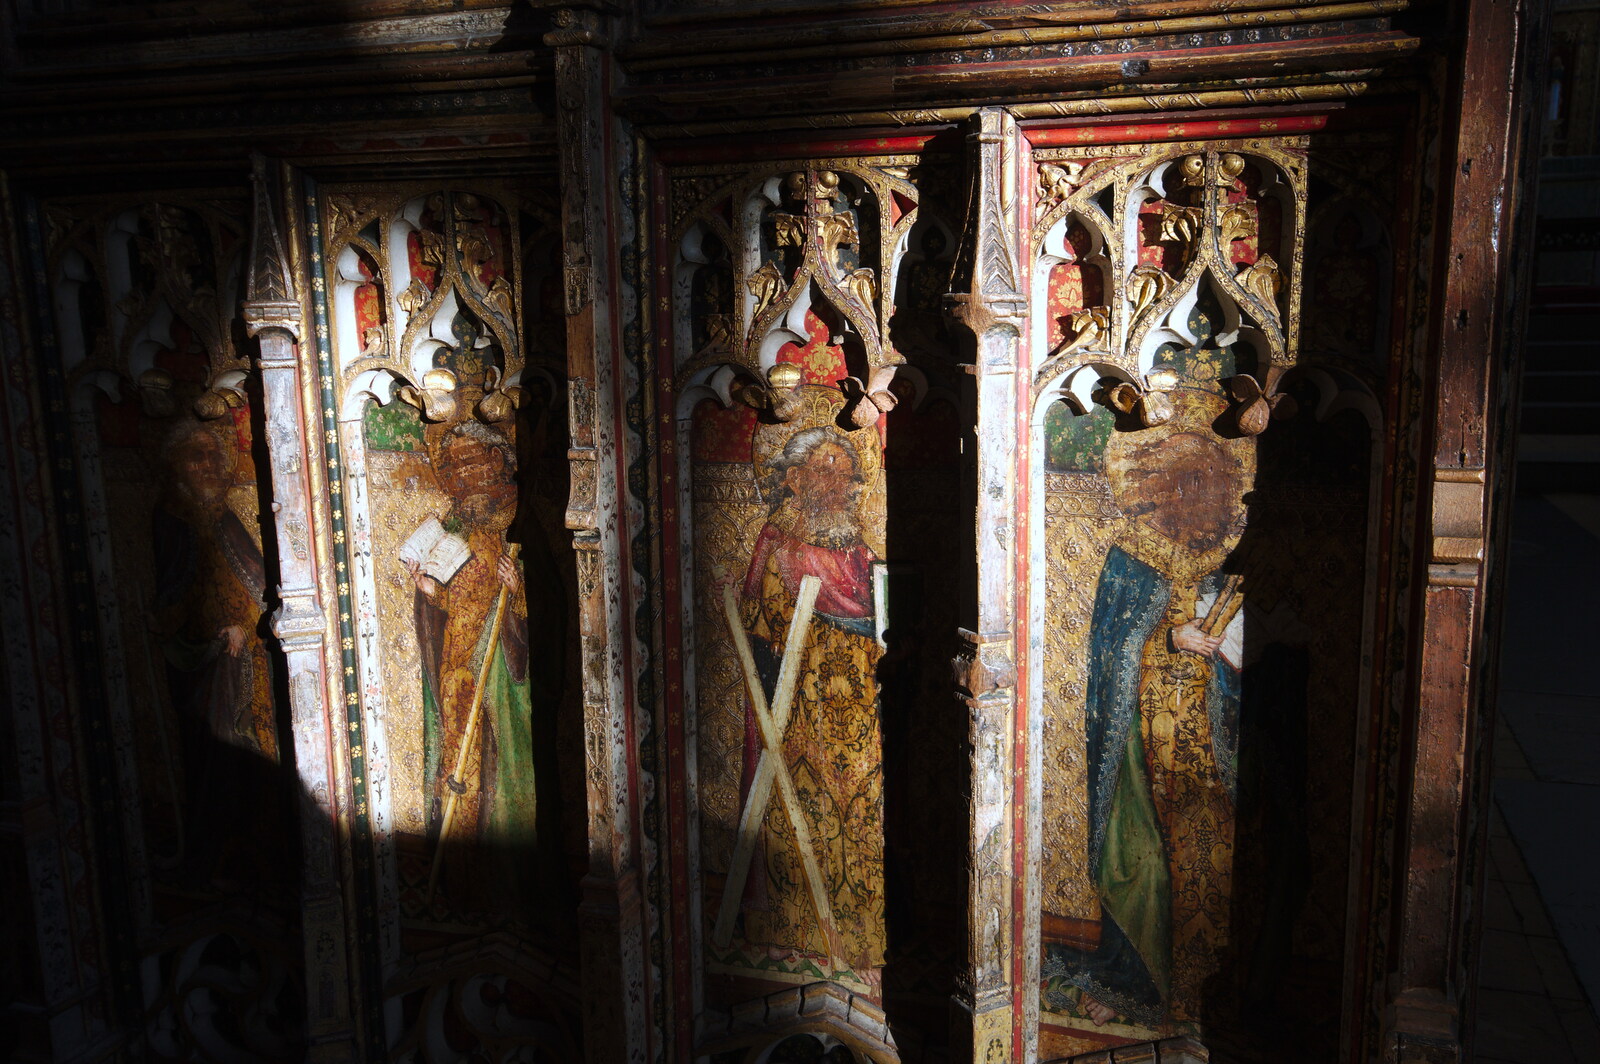 Mediaeval rood-screen paintings from A Trip up a Lighthouse, Southwold, Suffolk - 27th October 2019